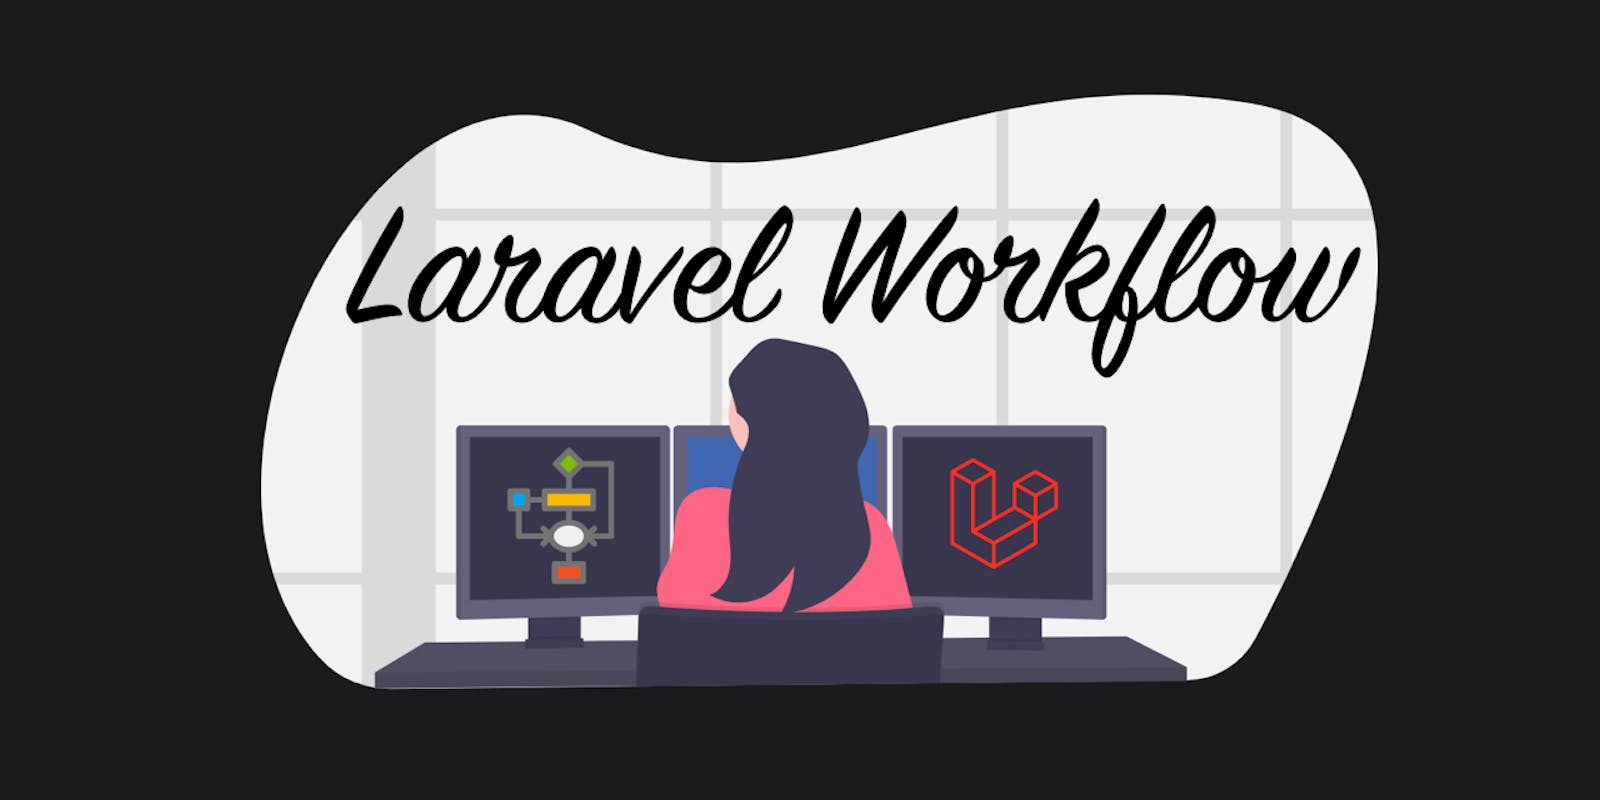 Get Started with Laravel Workflow: A Comprehensive Guide